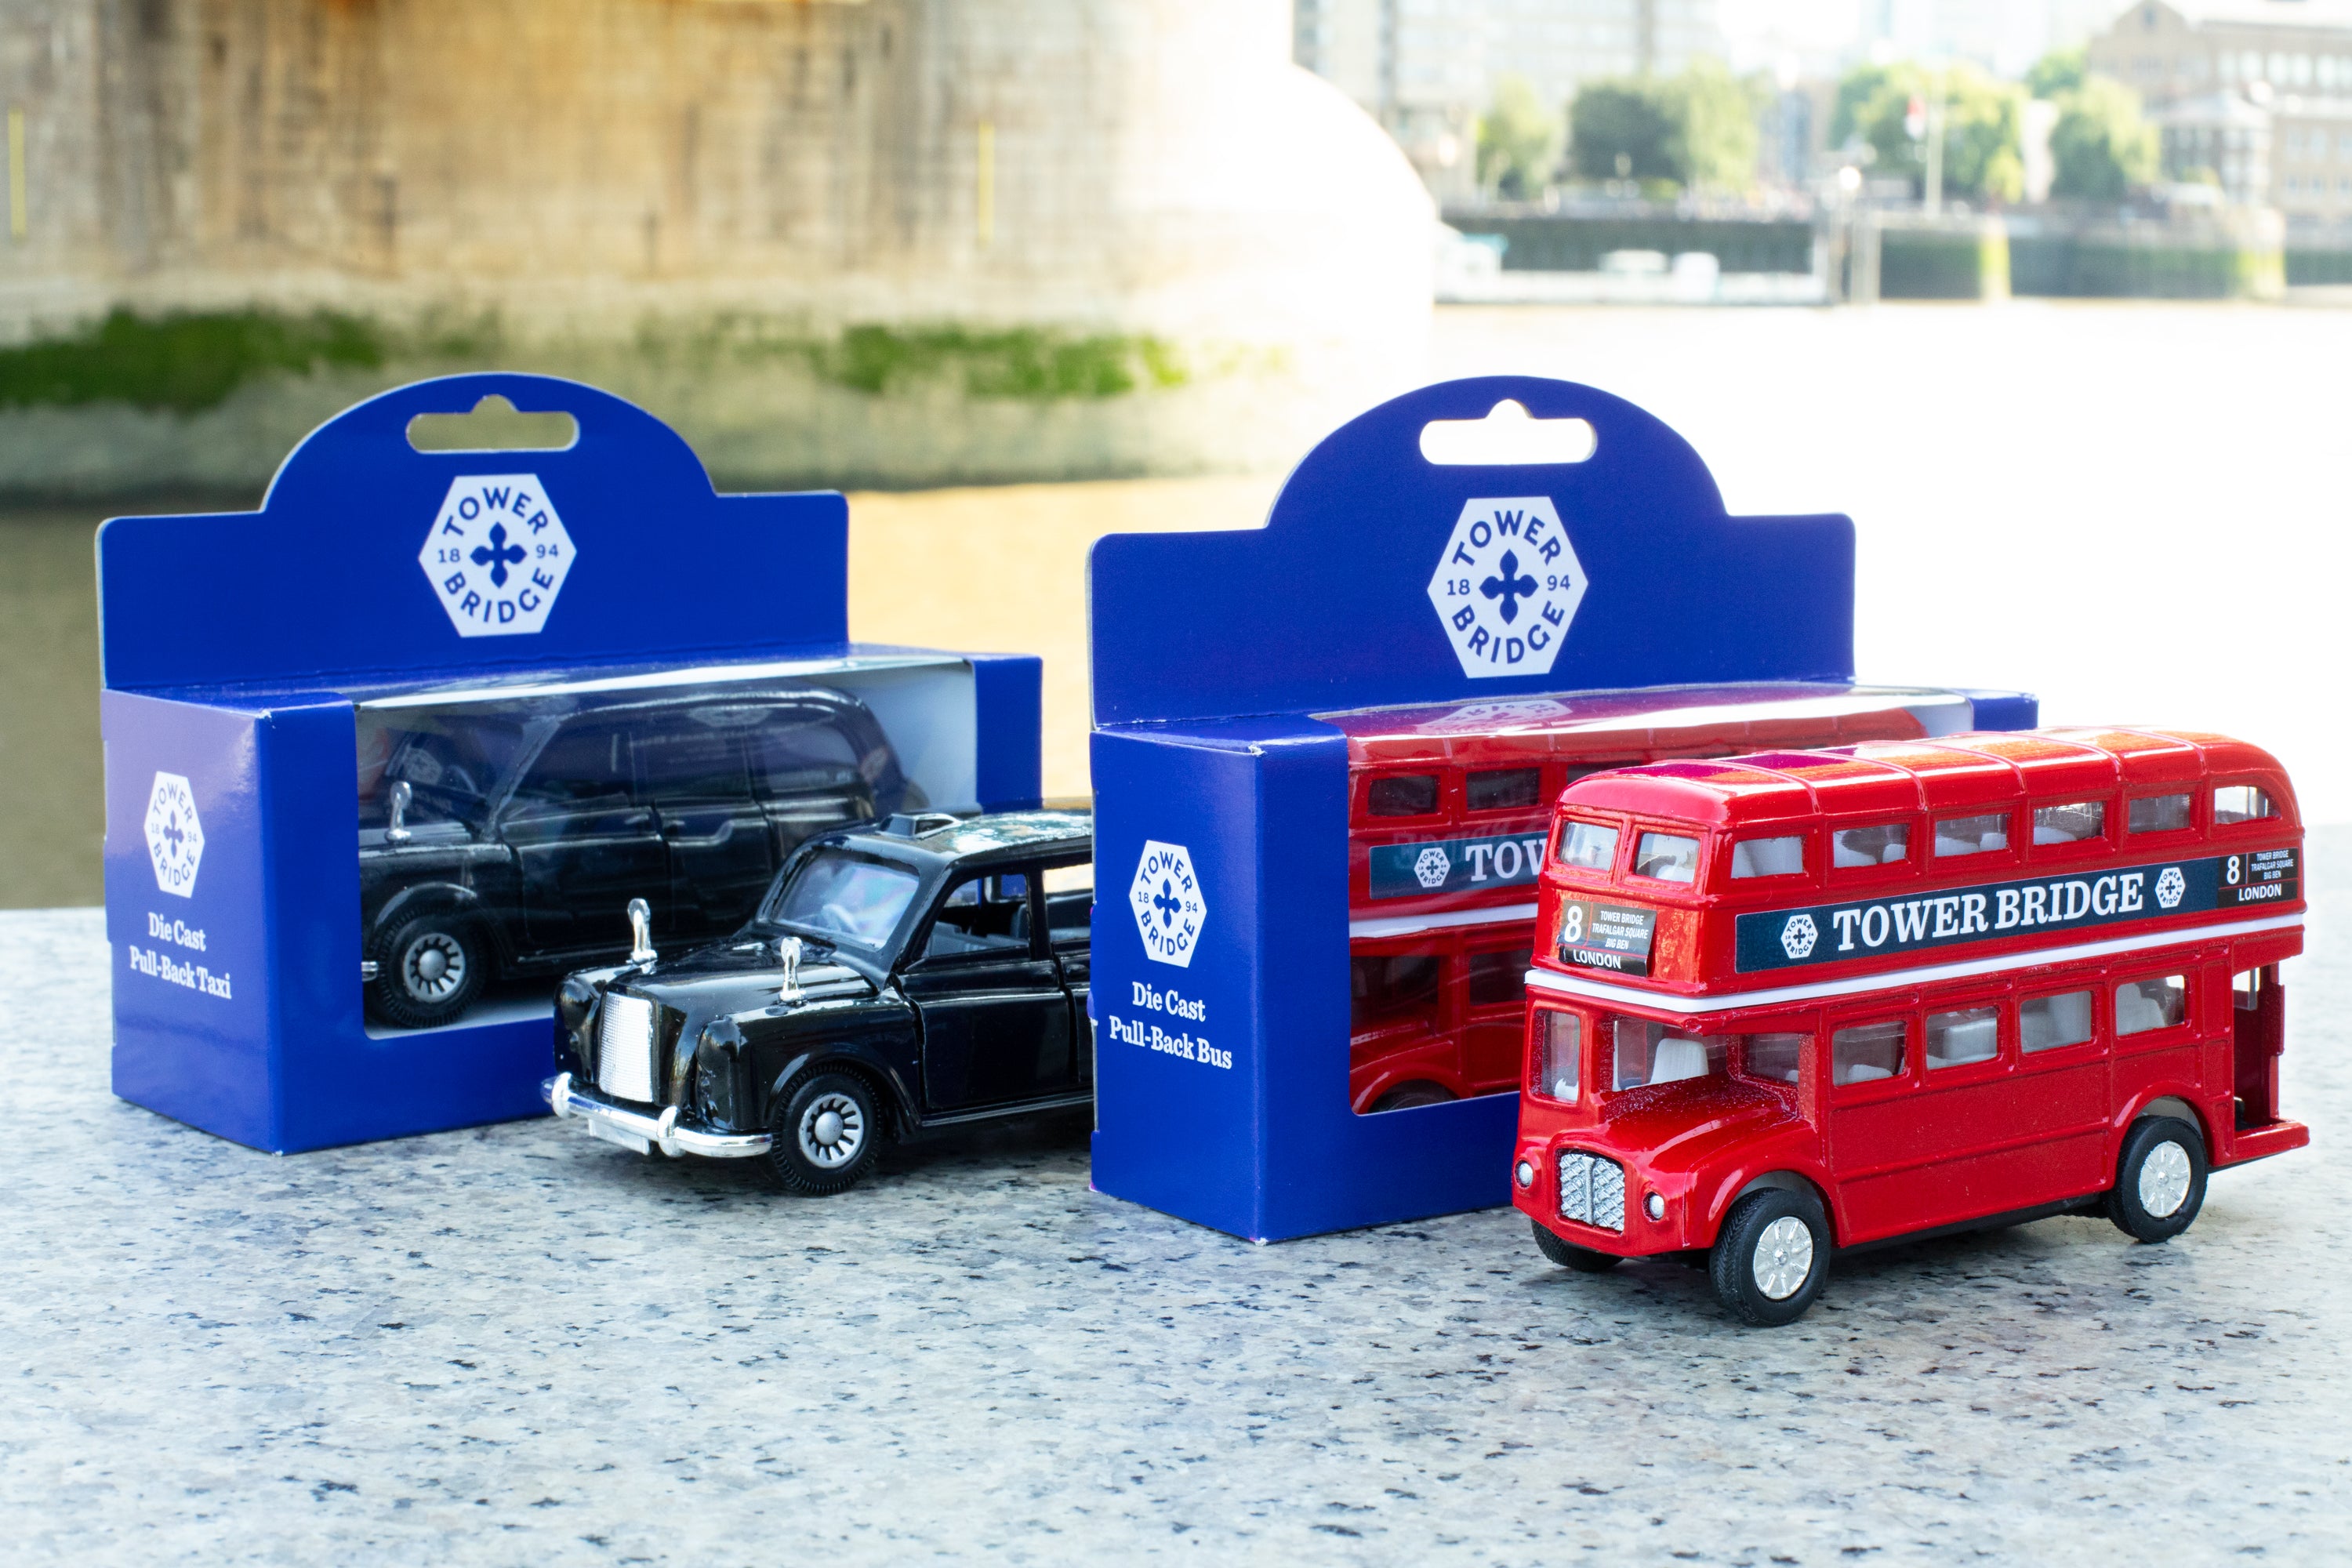 Die cast bus & taxi toy models from Tower Bridge